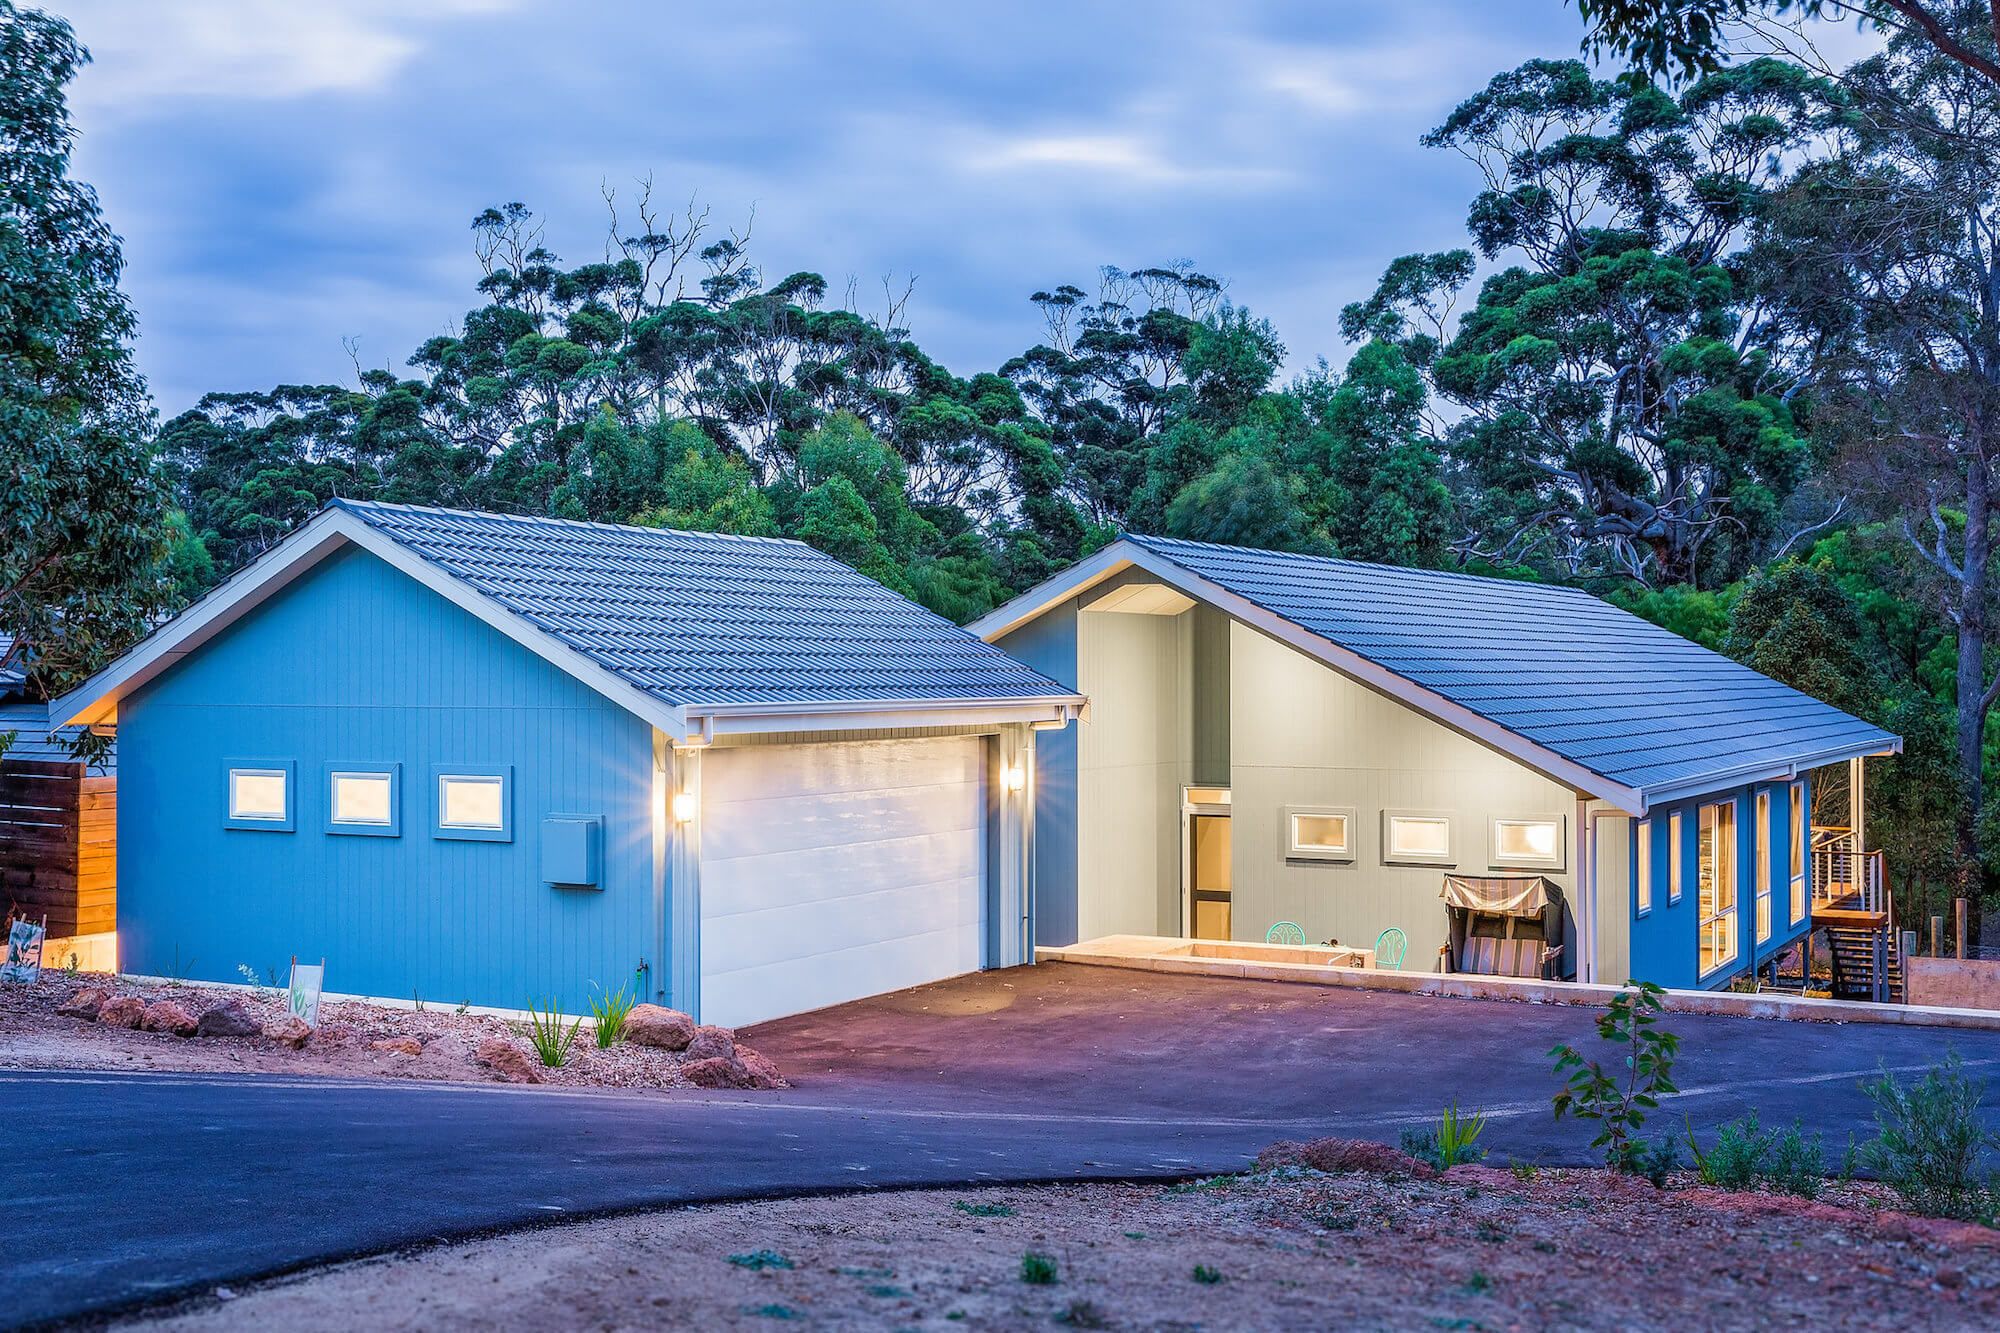 MSky Homes Home Builder Bunbury South West Australia a home in the bush forrest trees